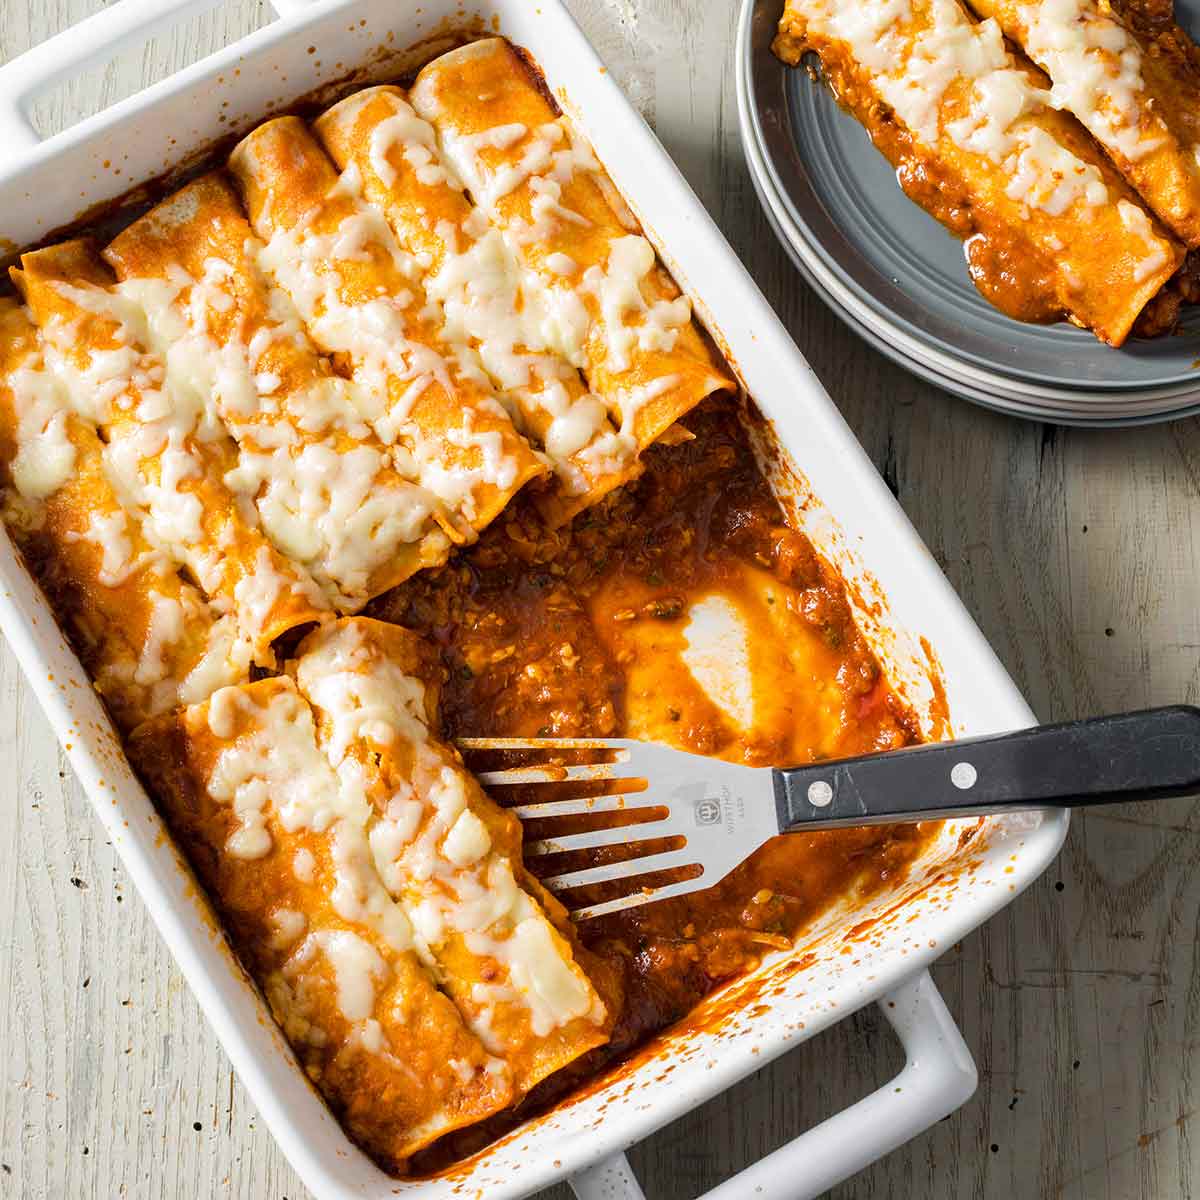 A rectangular dish of easy chicken enchiladas with a spatula resting in the dish and a couple enchiladas on a grey plate beside it.